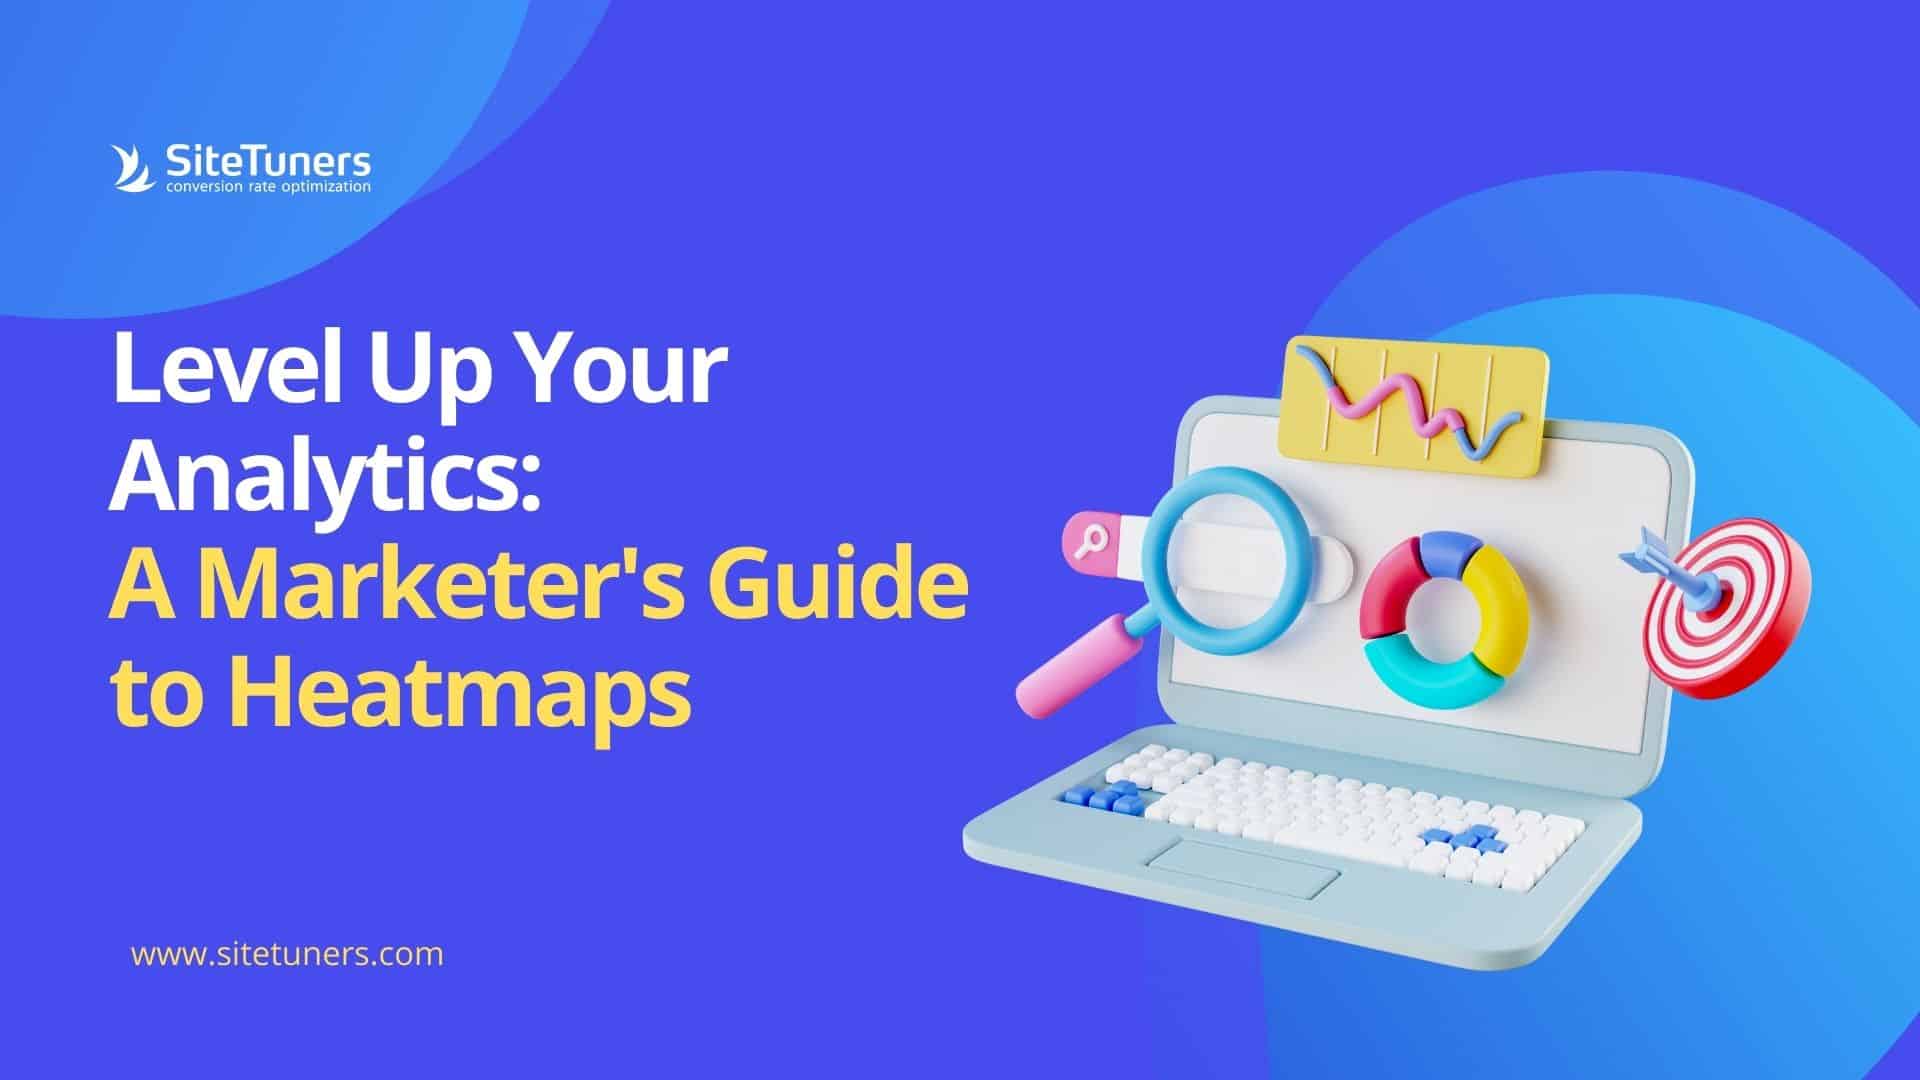 Level Up Your Analytics: A Marketer's Guide to Heatmaps